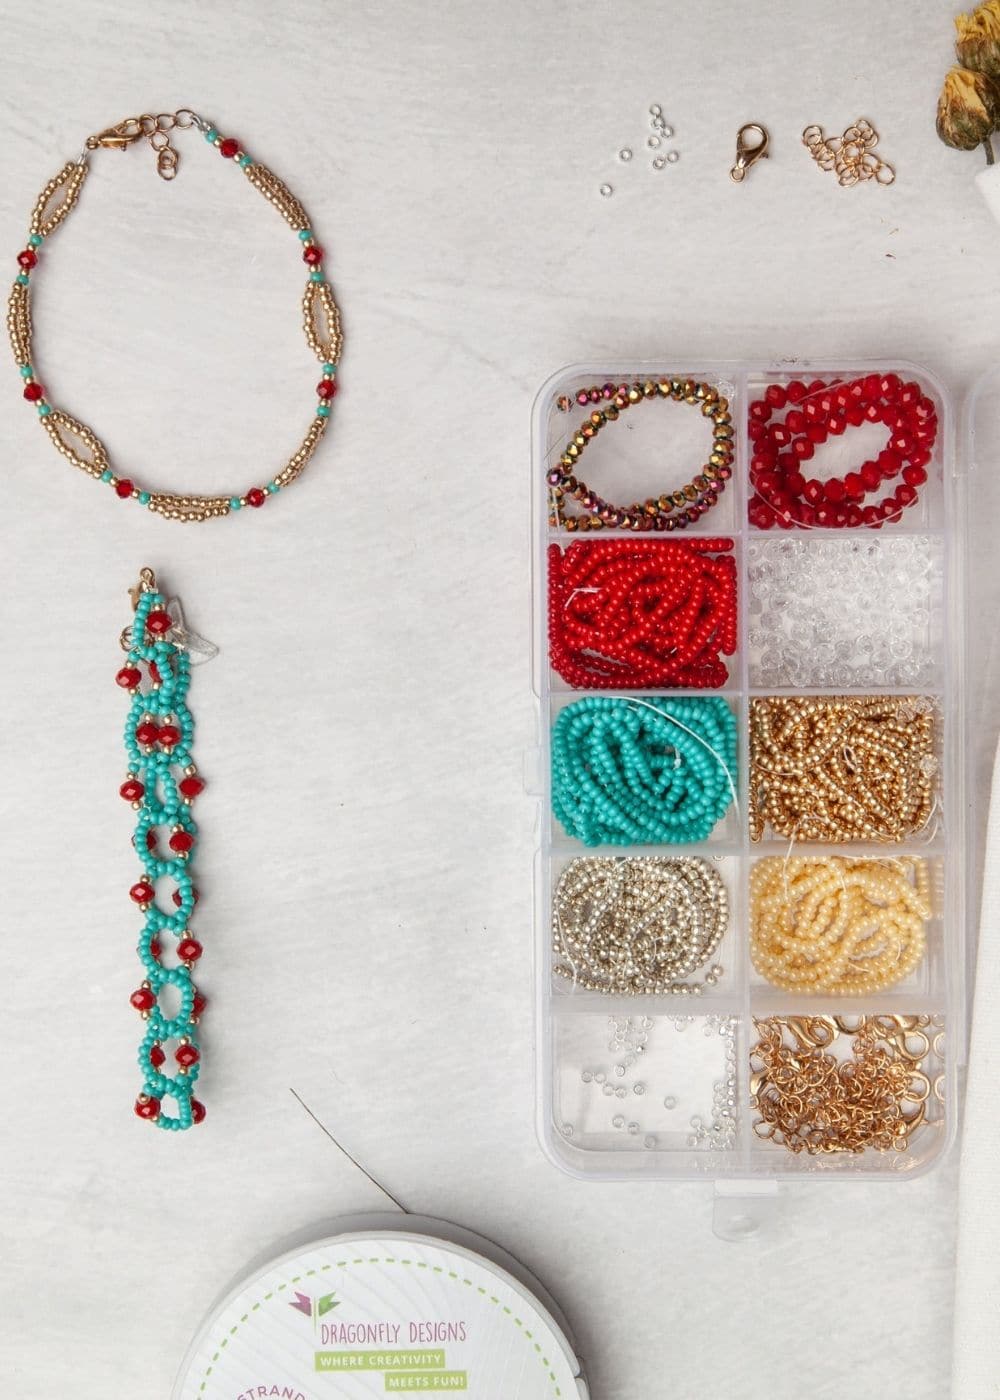 A box of beads, beads and tassels on a table.